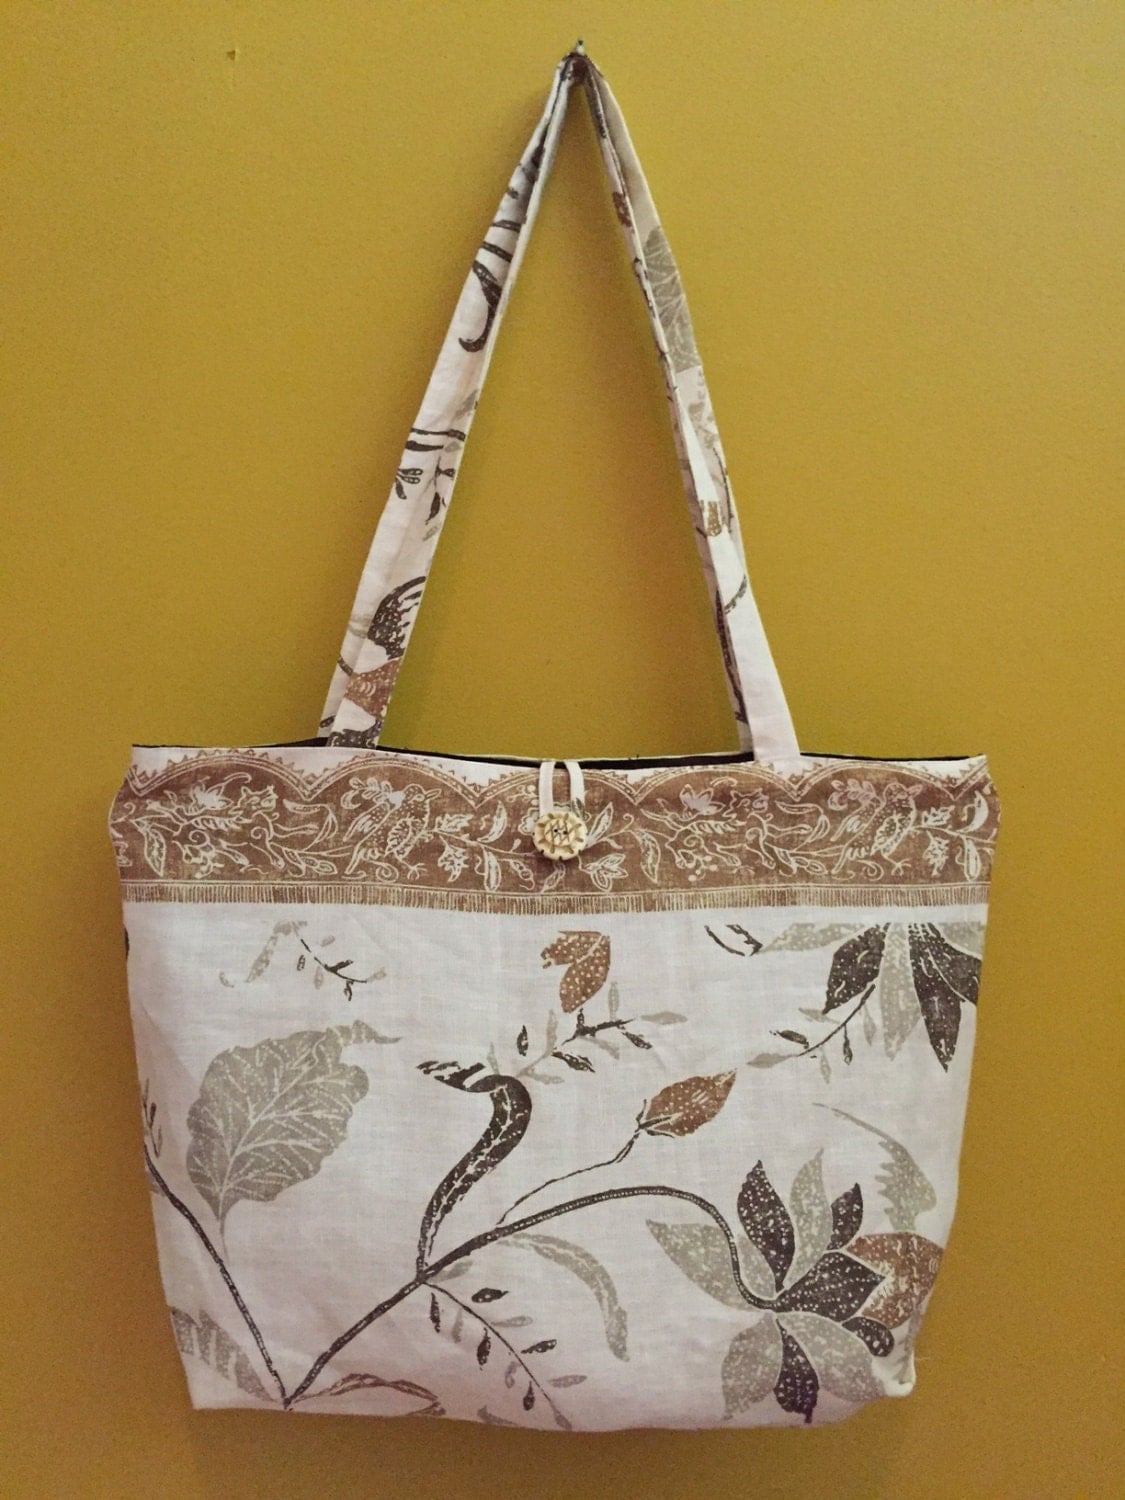 Large tote bag with pockets. Beautiful large tote with